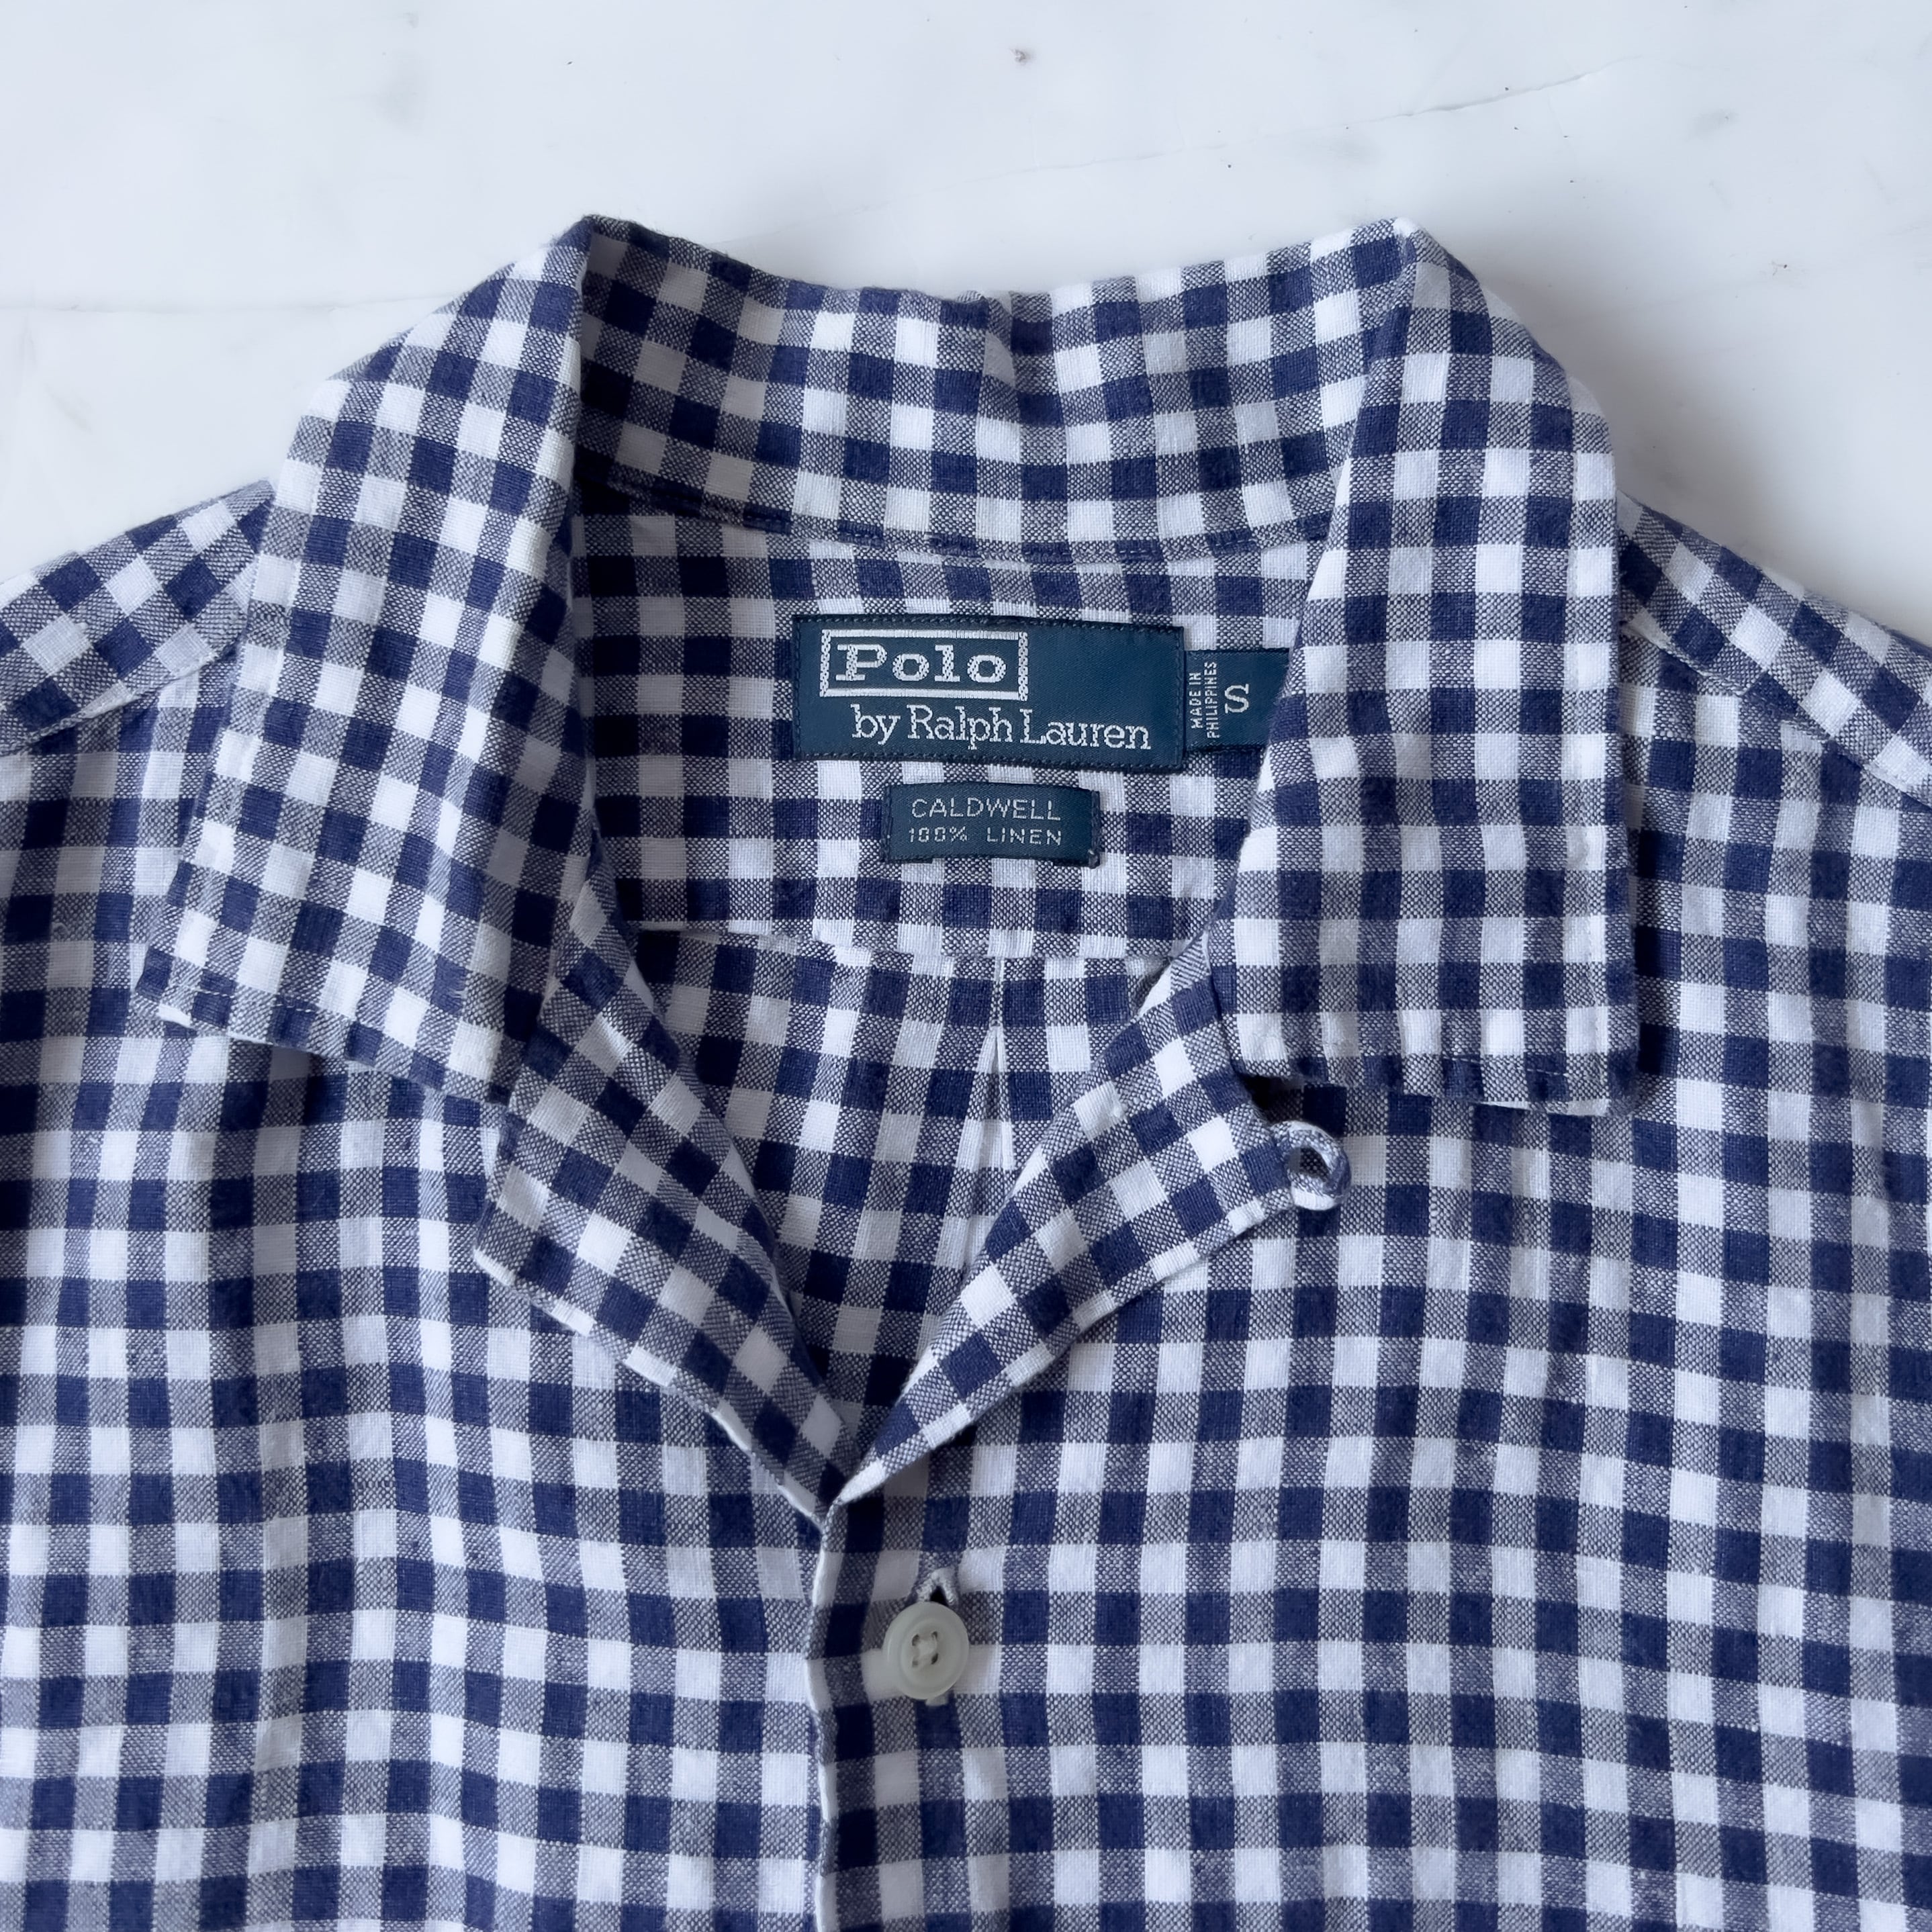 s “polo by ralph lauren” “CALDWELL” gingham check pattern flax